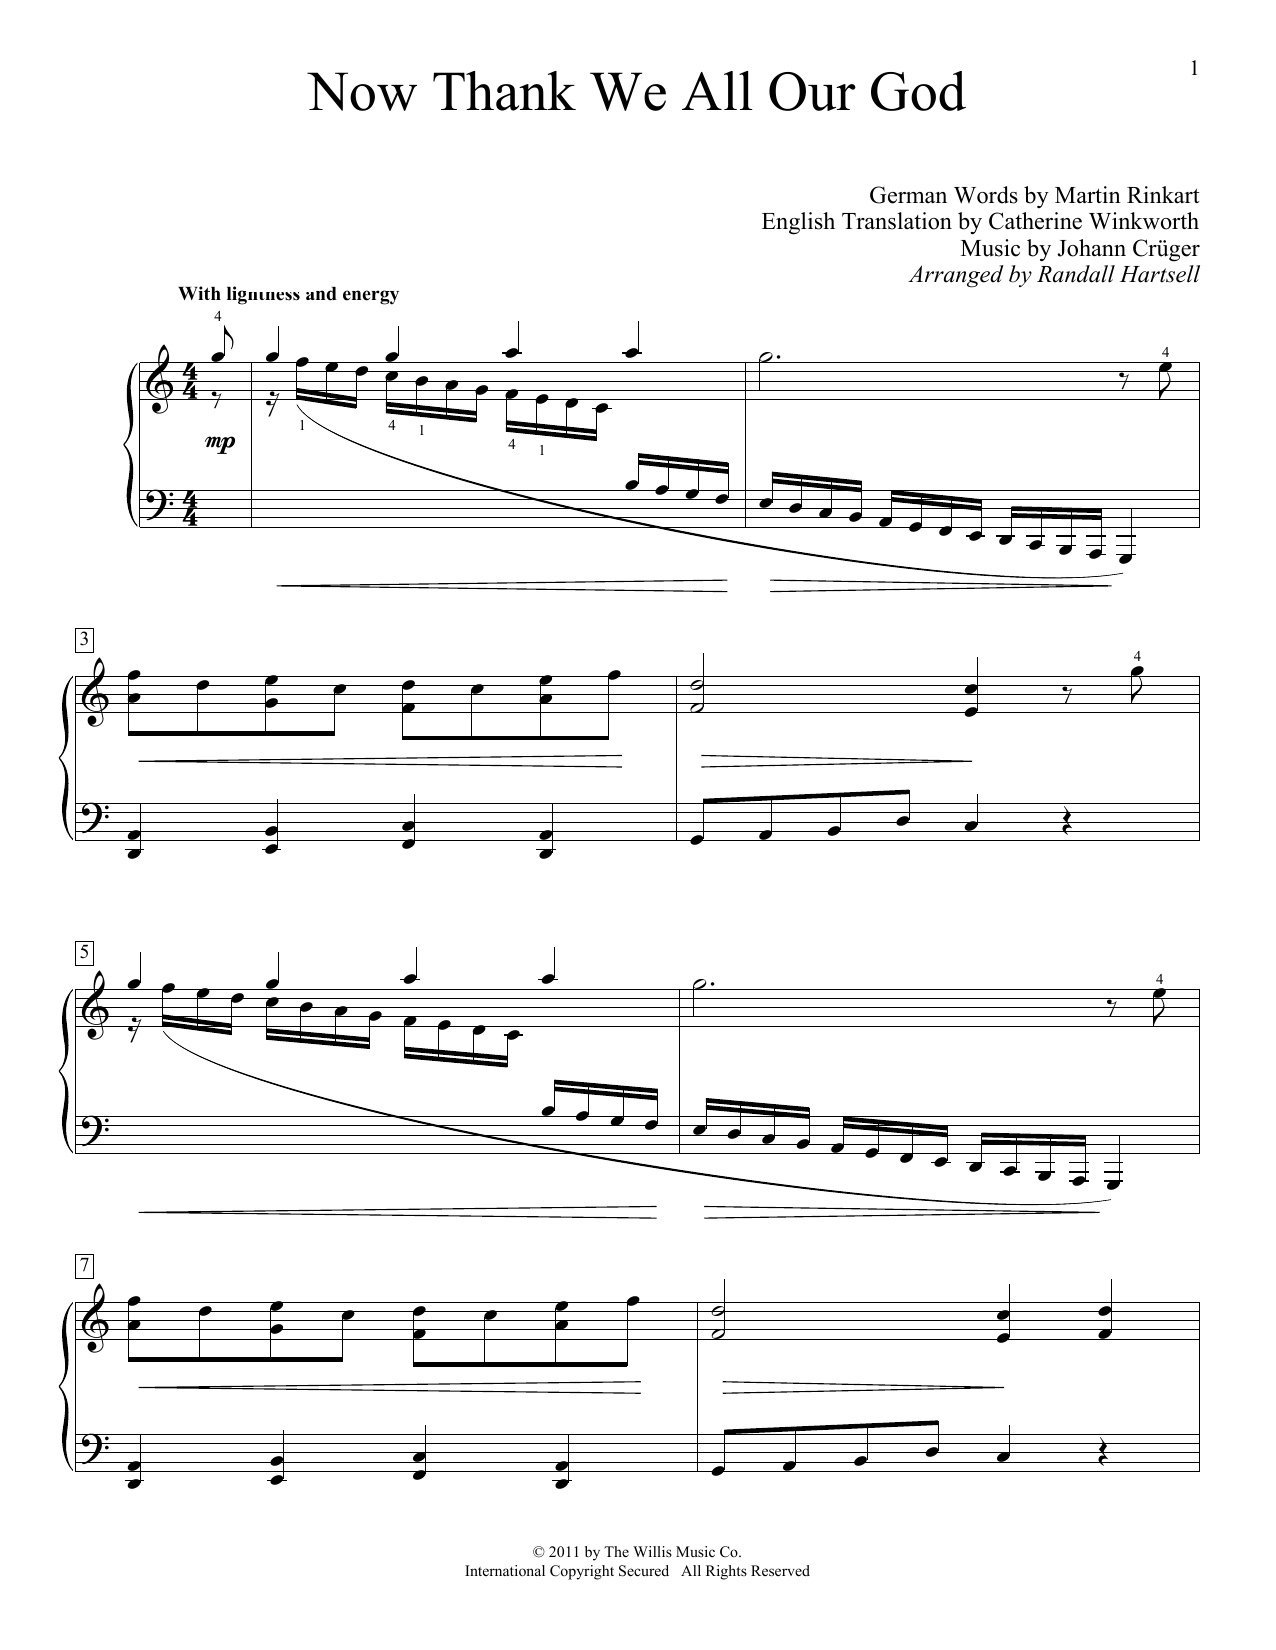 Download Martin Rinkart Now Thank We All Our God Sheet Music